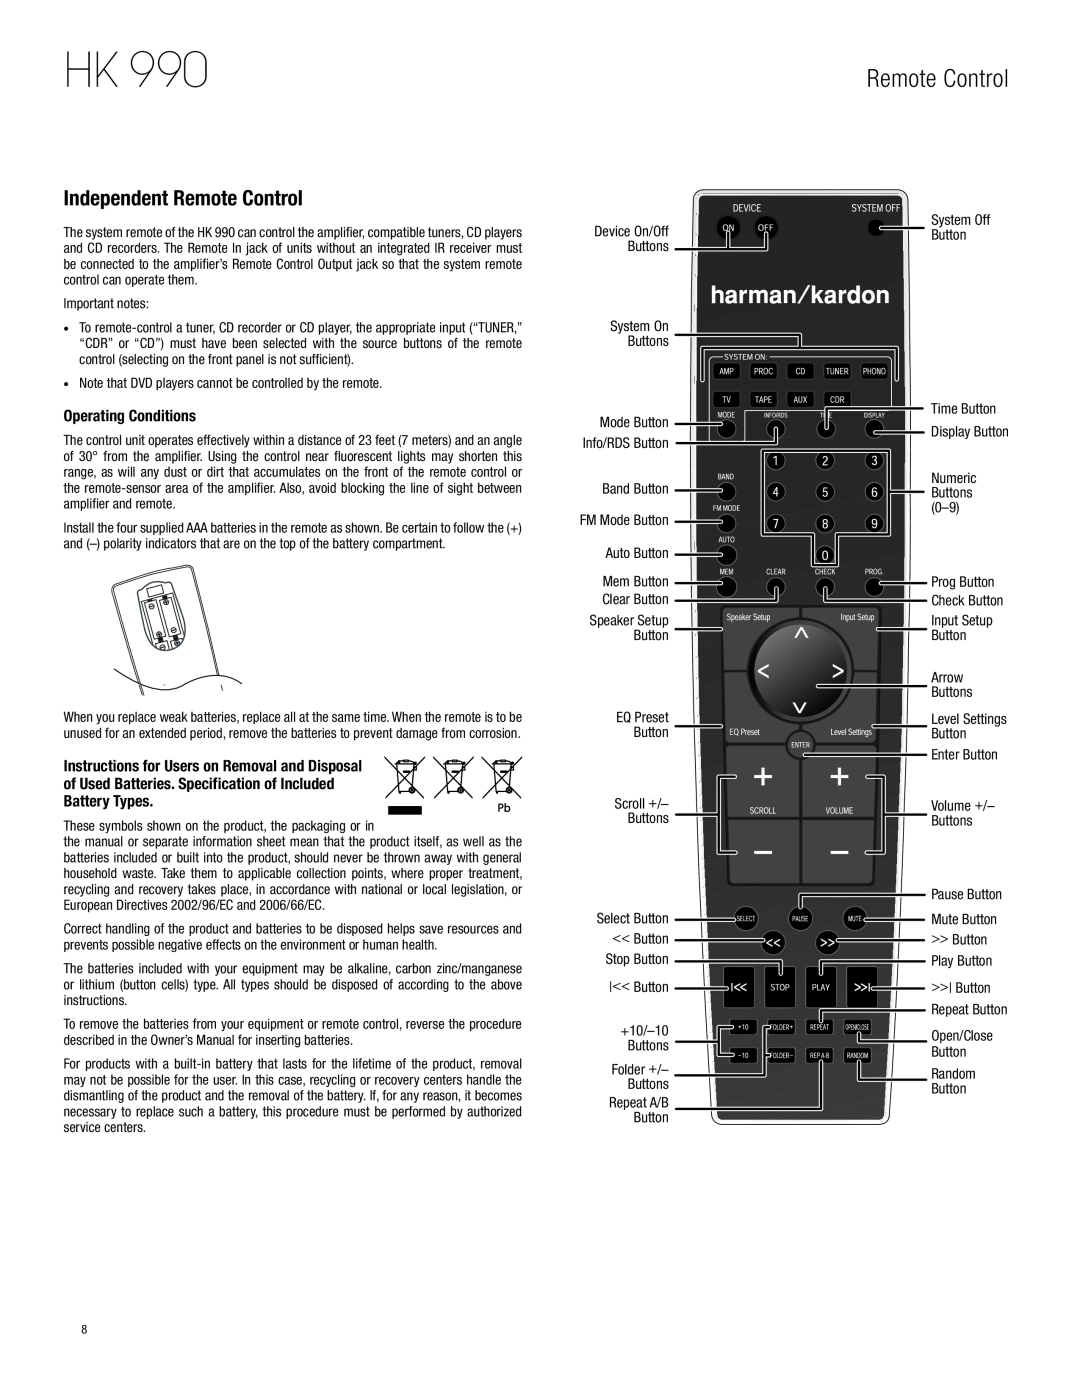 Harman HK 990 owner manual Independent Remote Control, Operating Conditions 